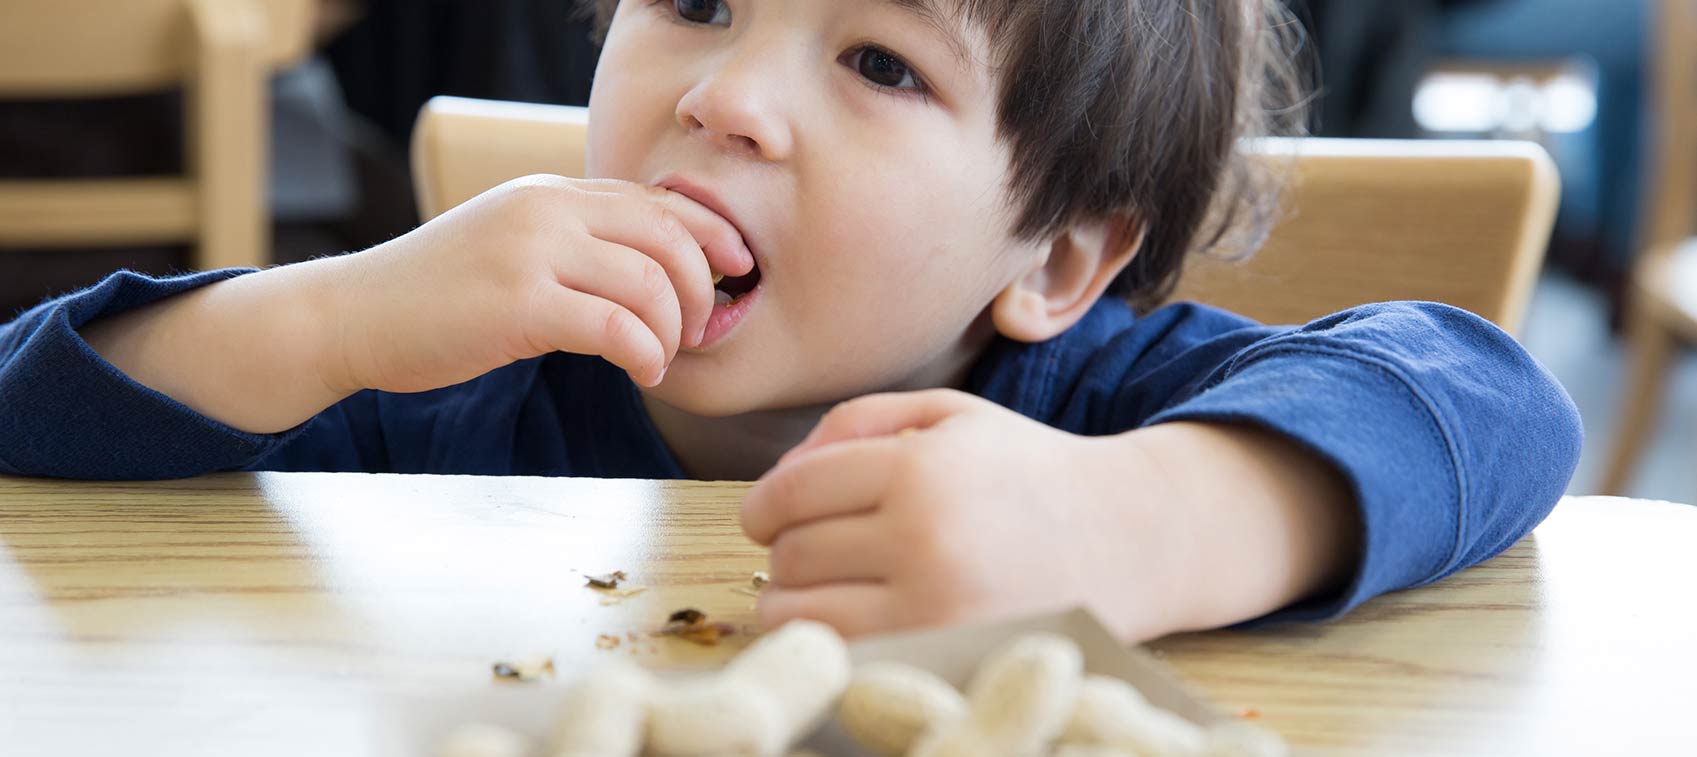 Not-So-Simple Reasons for Peanut Allergies